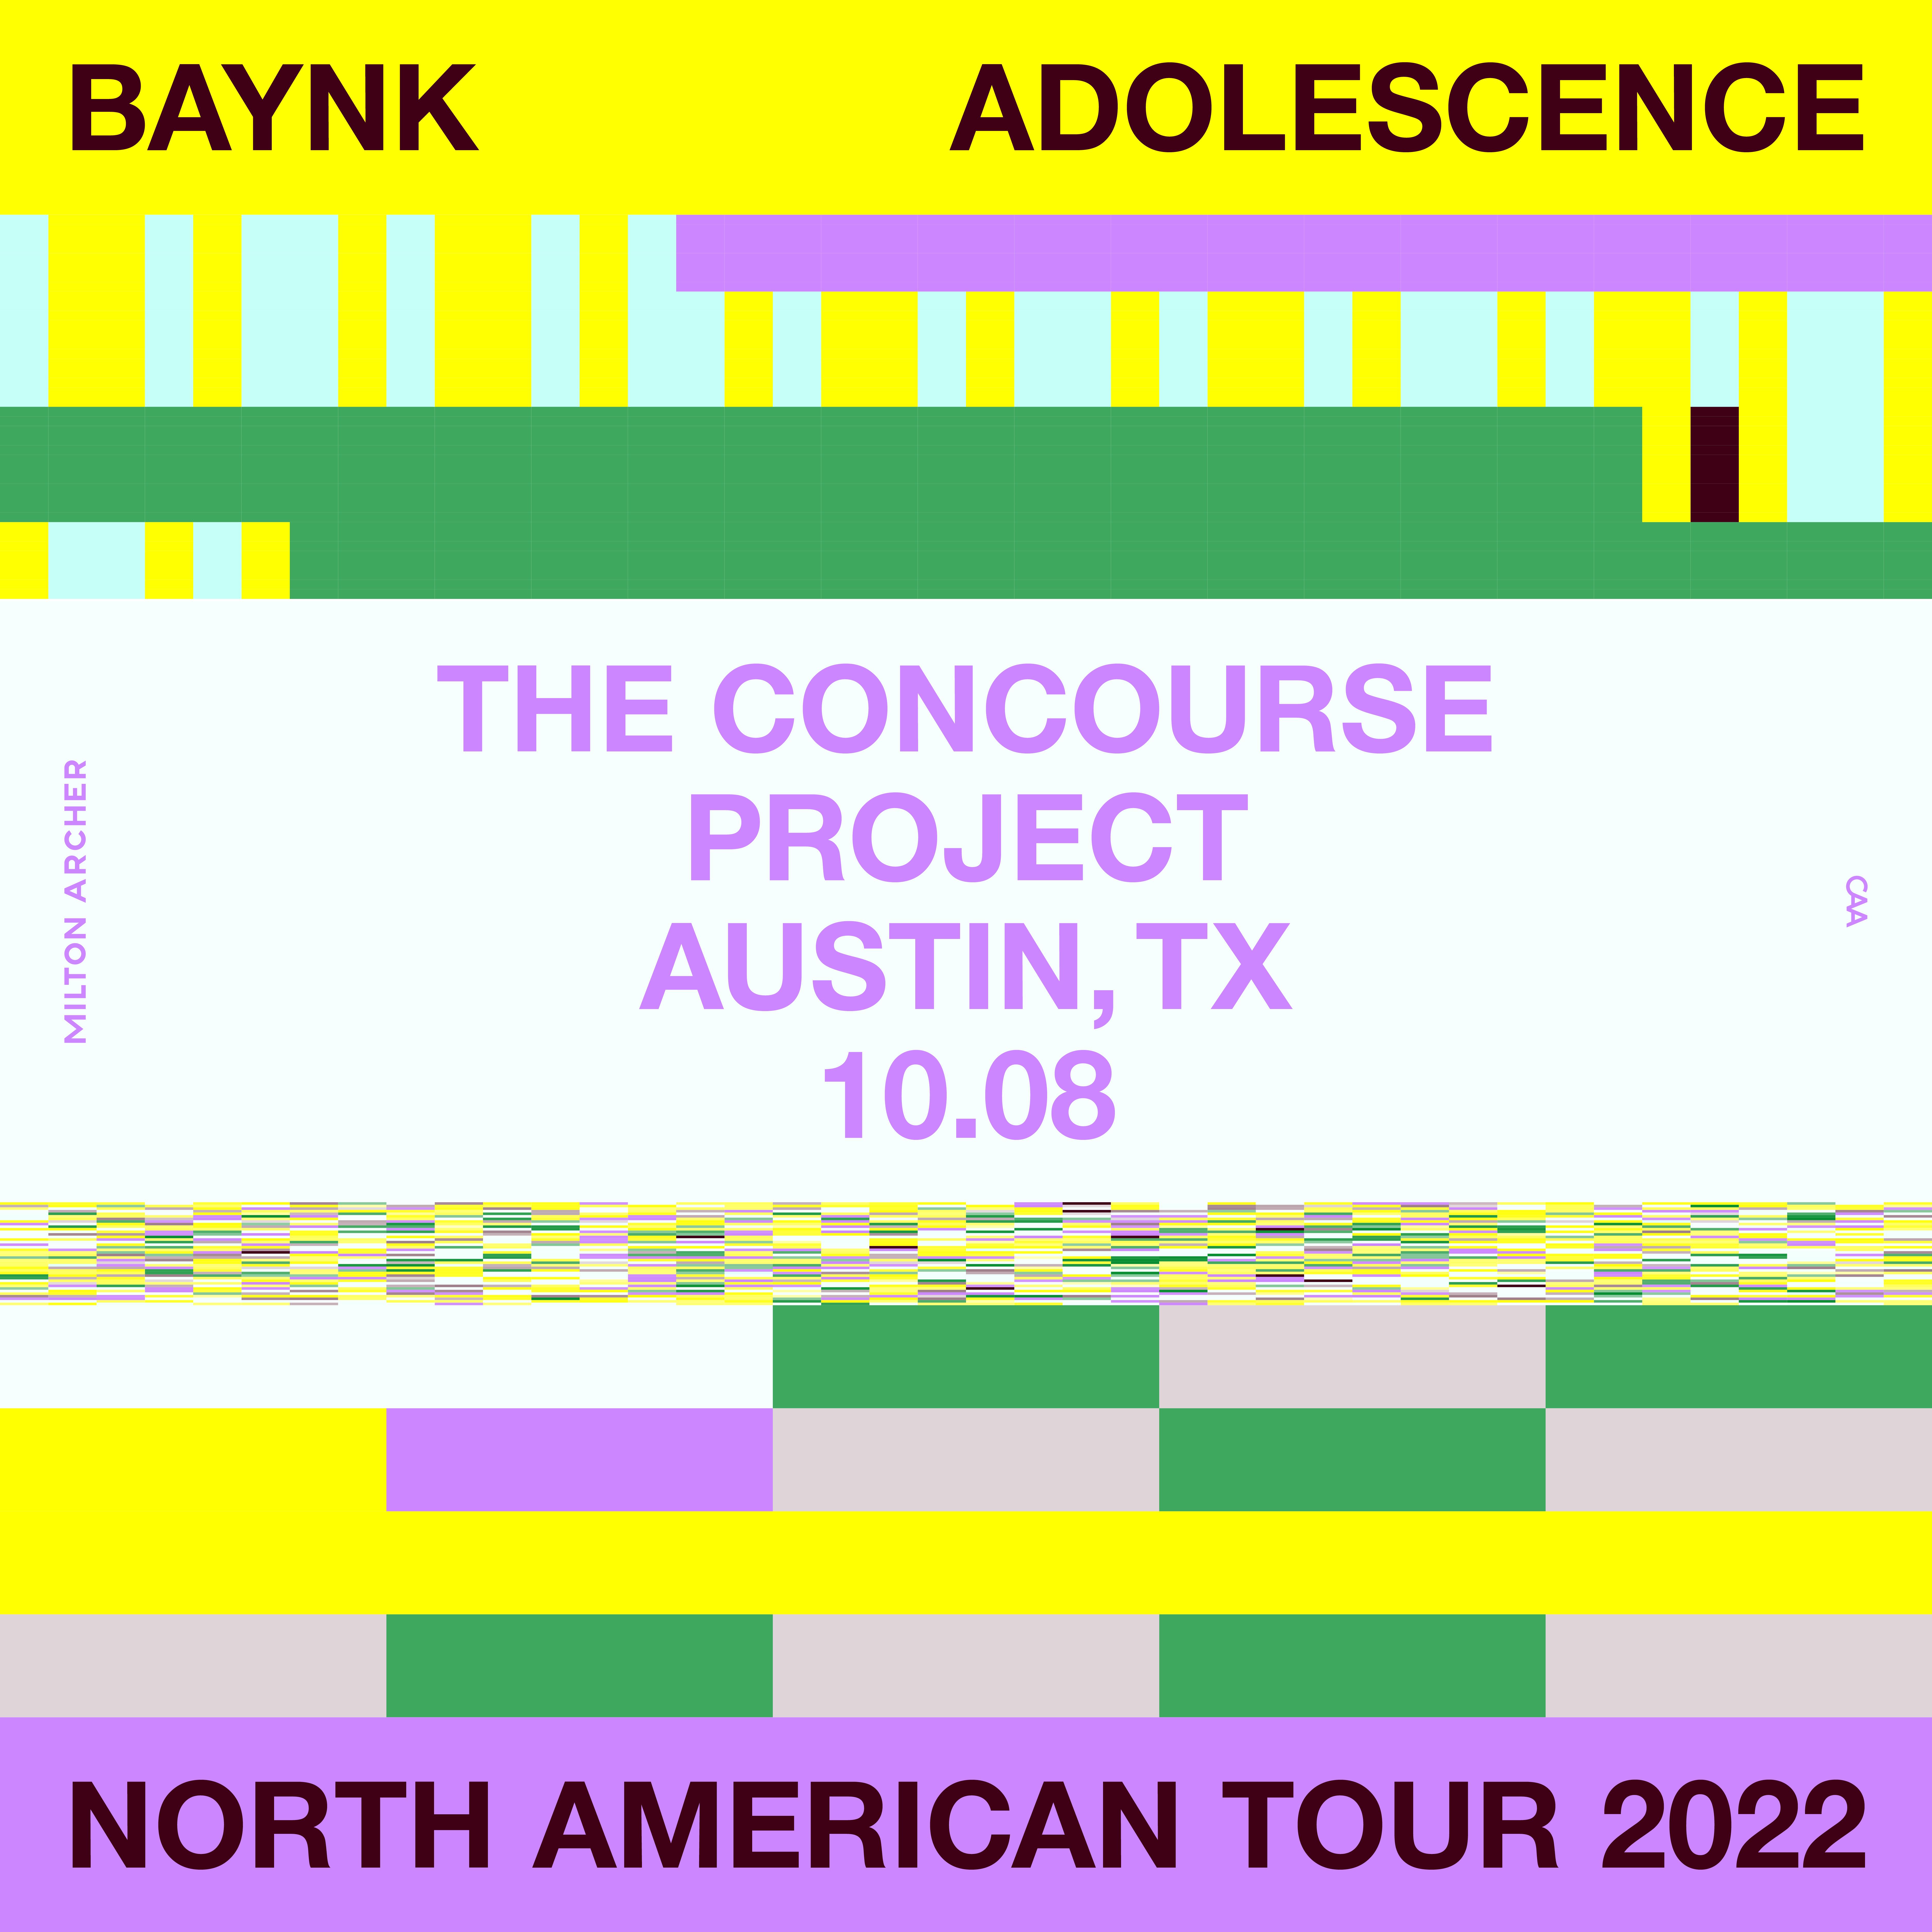 BAYNK at The Concourse Project